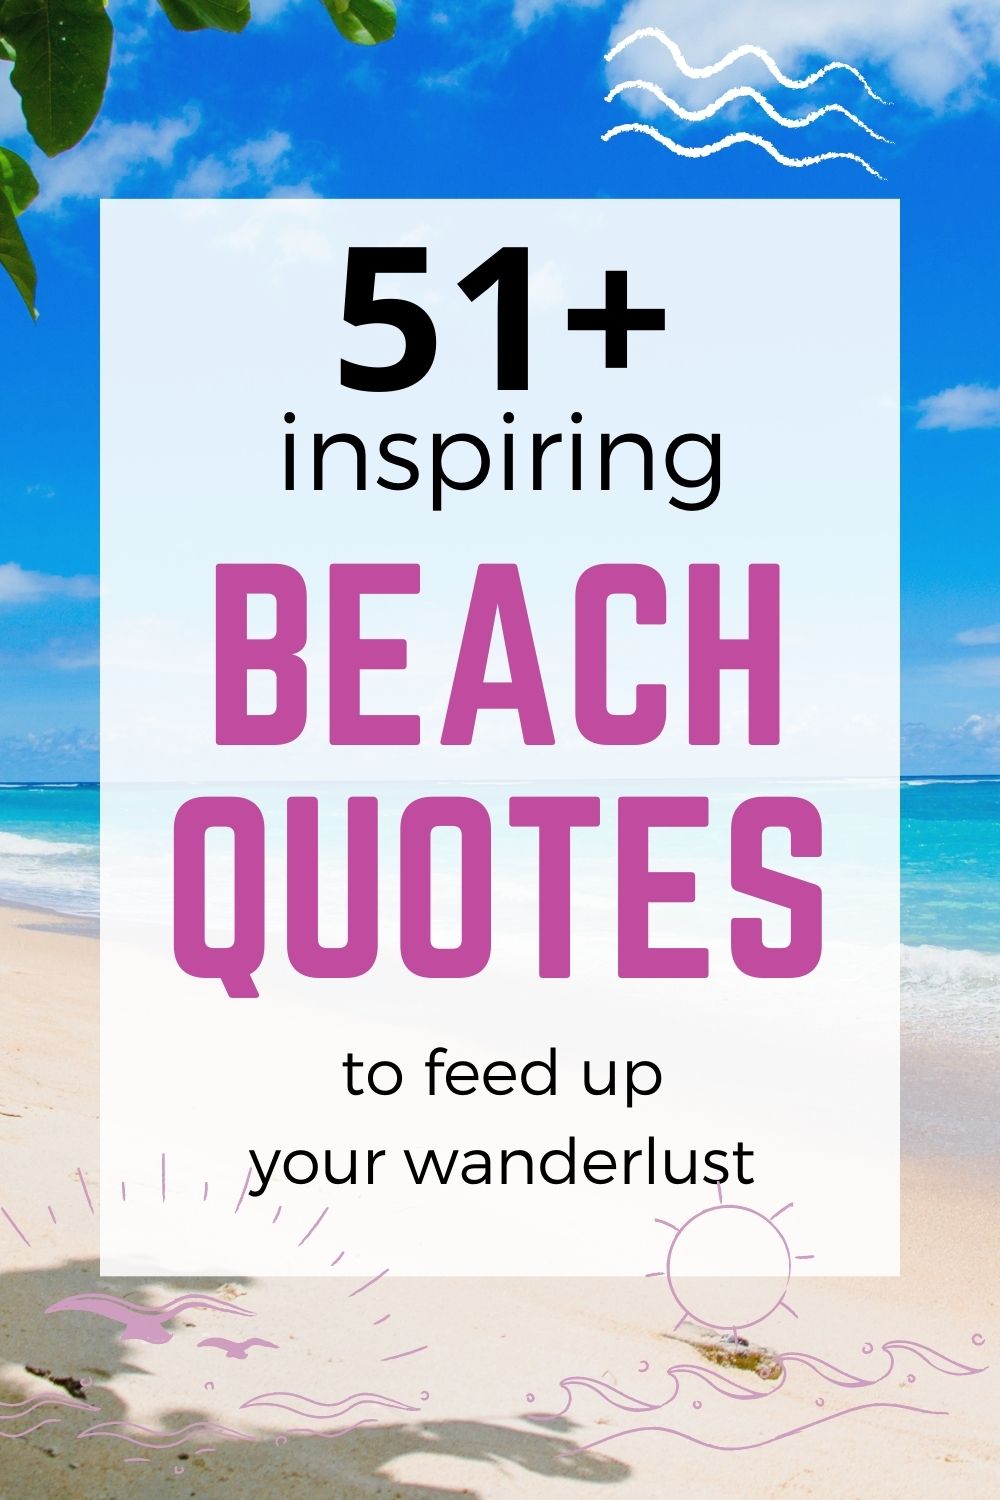 51+ inspiring beach quotes to feed up your wanderlust - Pinterest image